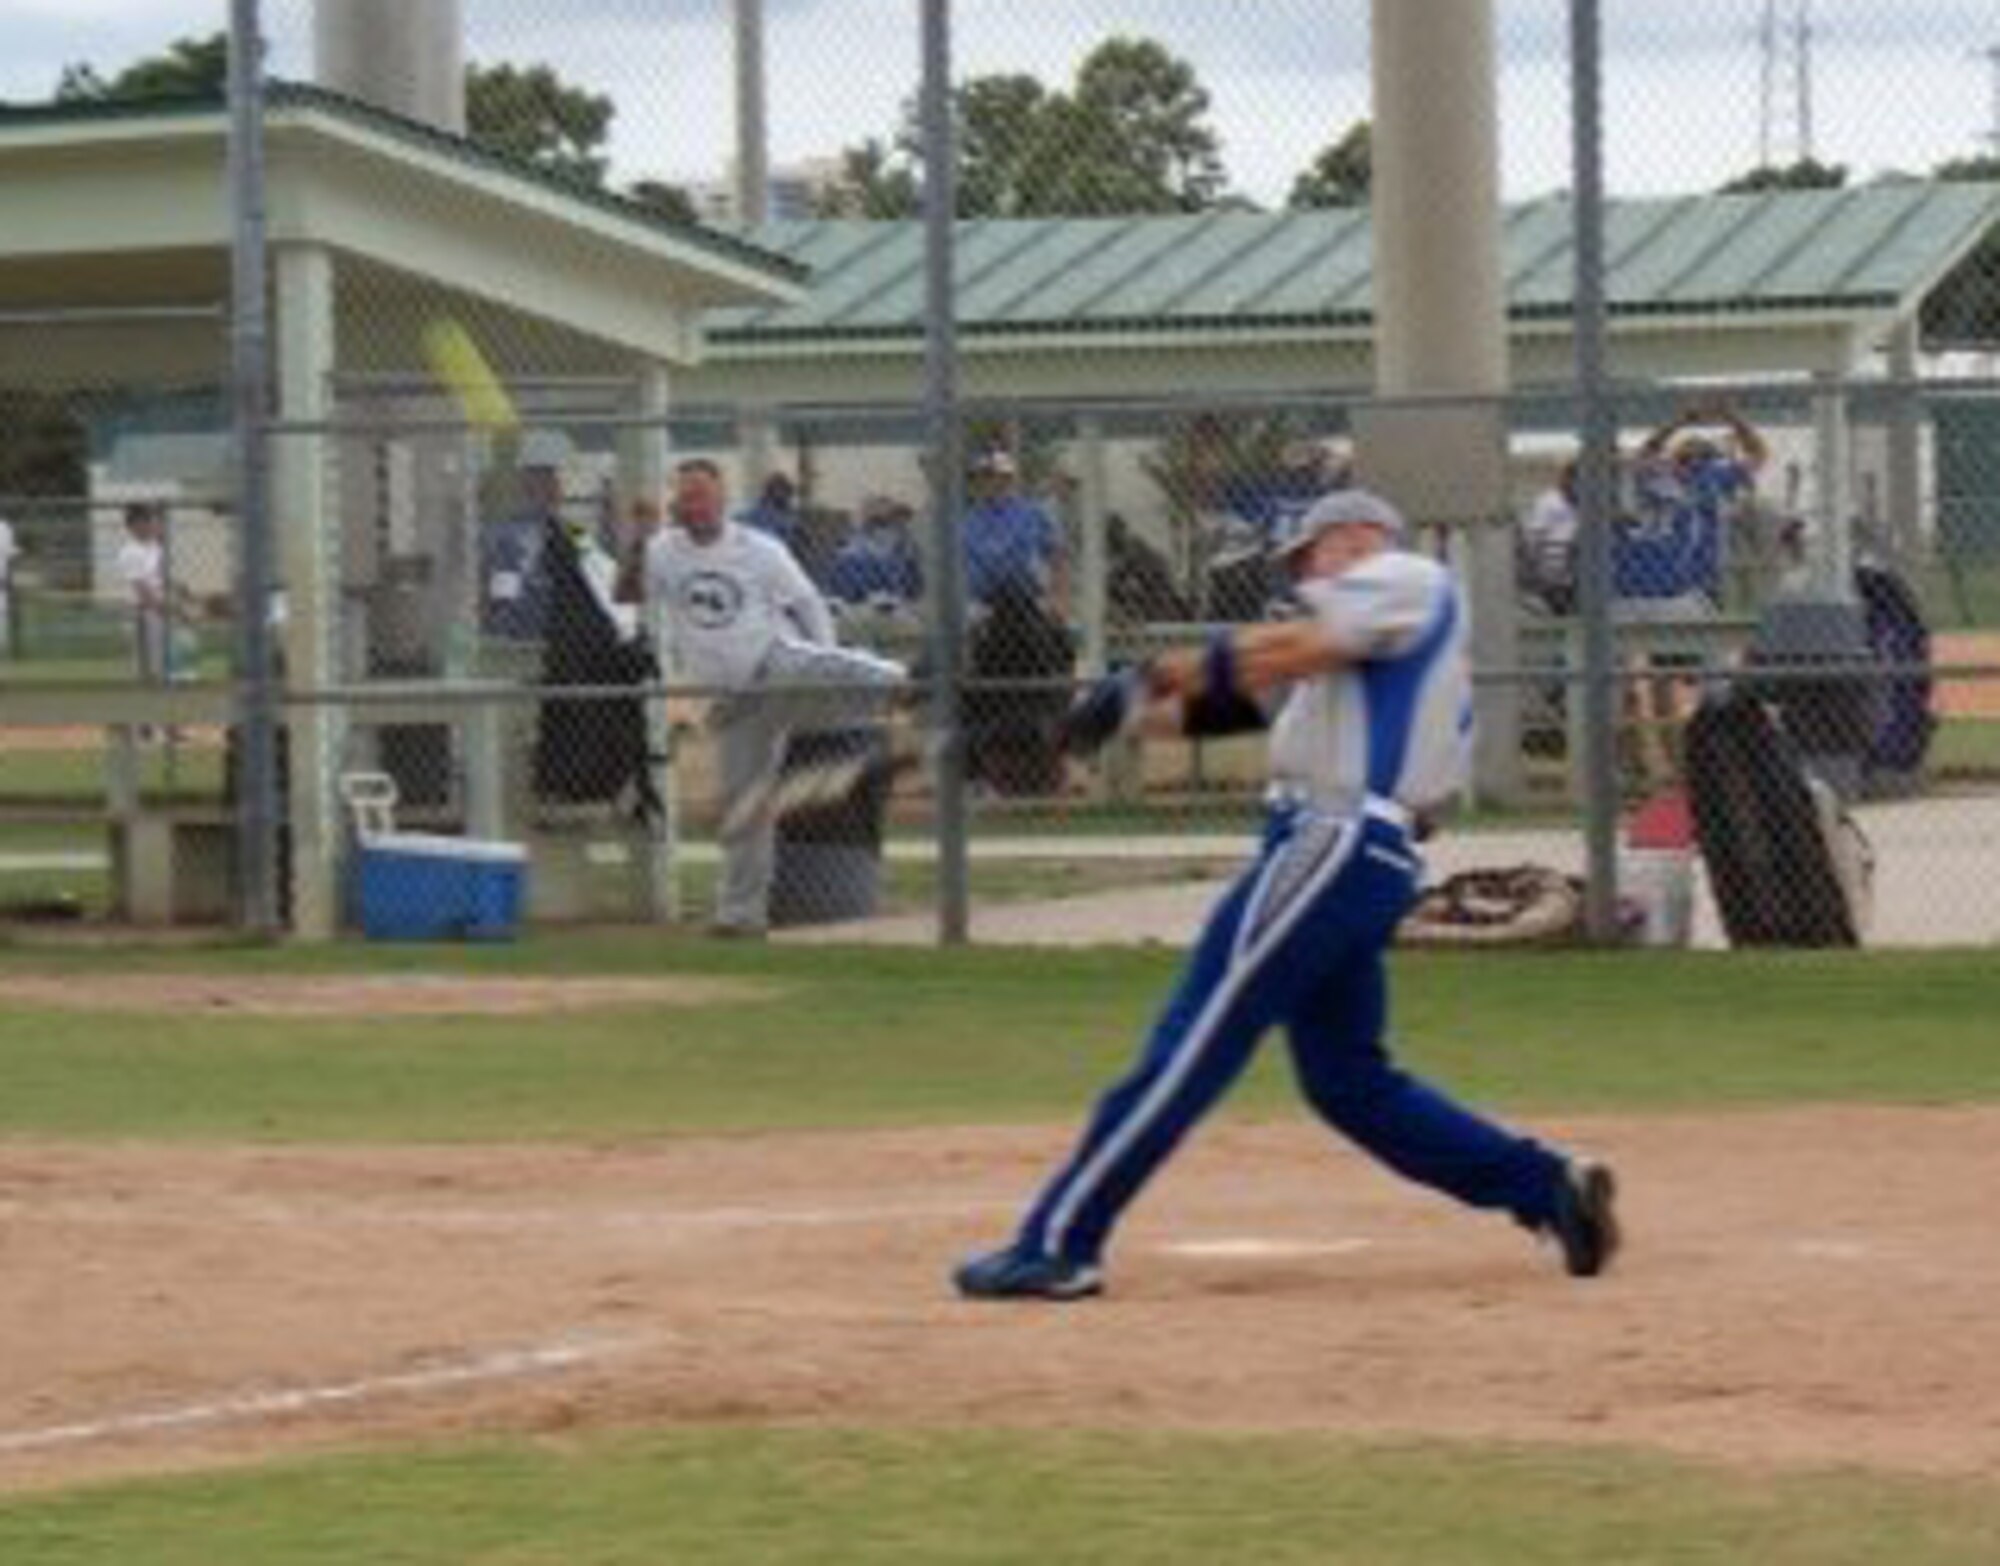 Kasper had a .733 and five home runs during the tournament, helping The Falcons secure a third place finish in the 2009 Military World Softball Tournament.  